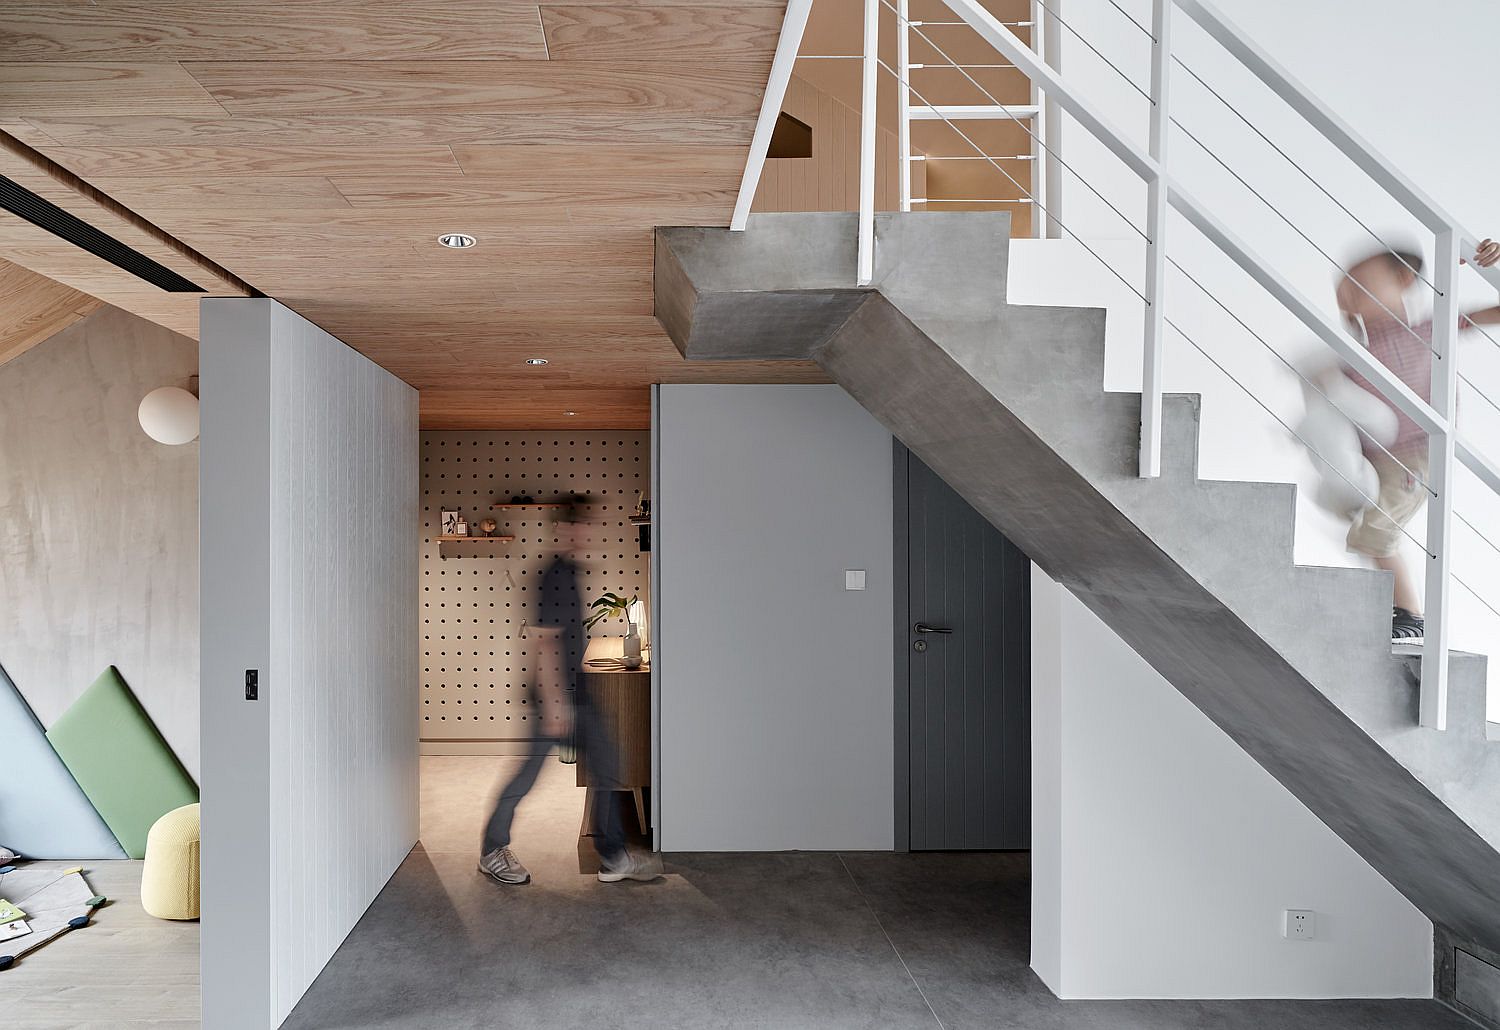 Staircase-and-floor-brings-concrete-charm-to-the-interior